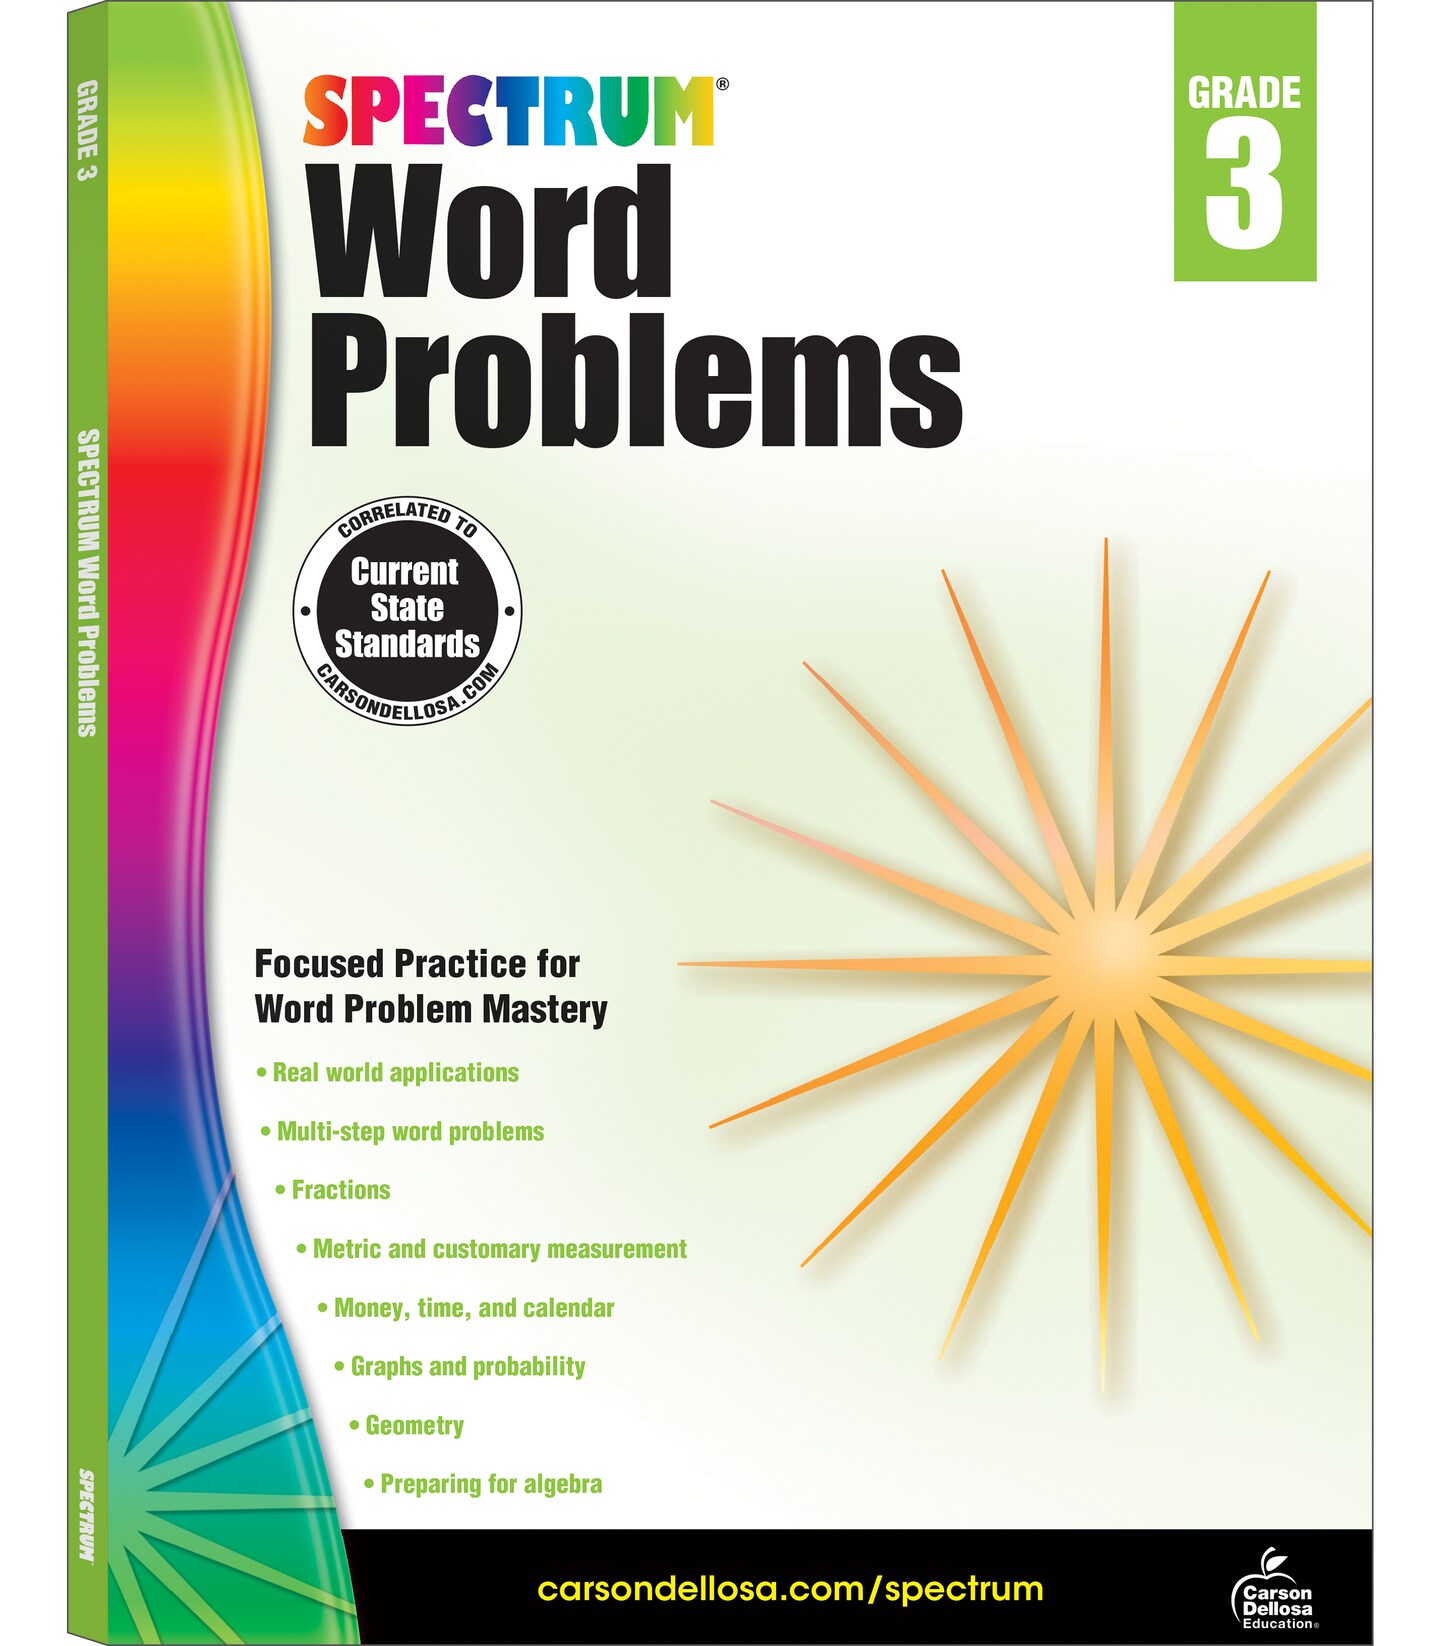 Spectrum Math Word Problems Grade 3 Workbook, Ages 8 to 9, 3rd Grade Math Word Problems, Fractions, Algebra Prep, Geometry, Multi-Step Word Problems, Money, and Time - 128 Pages